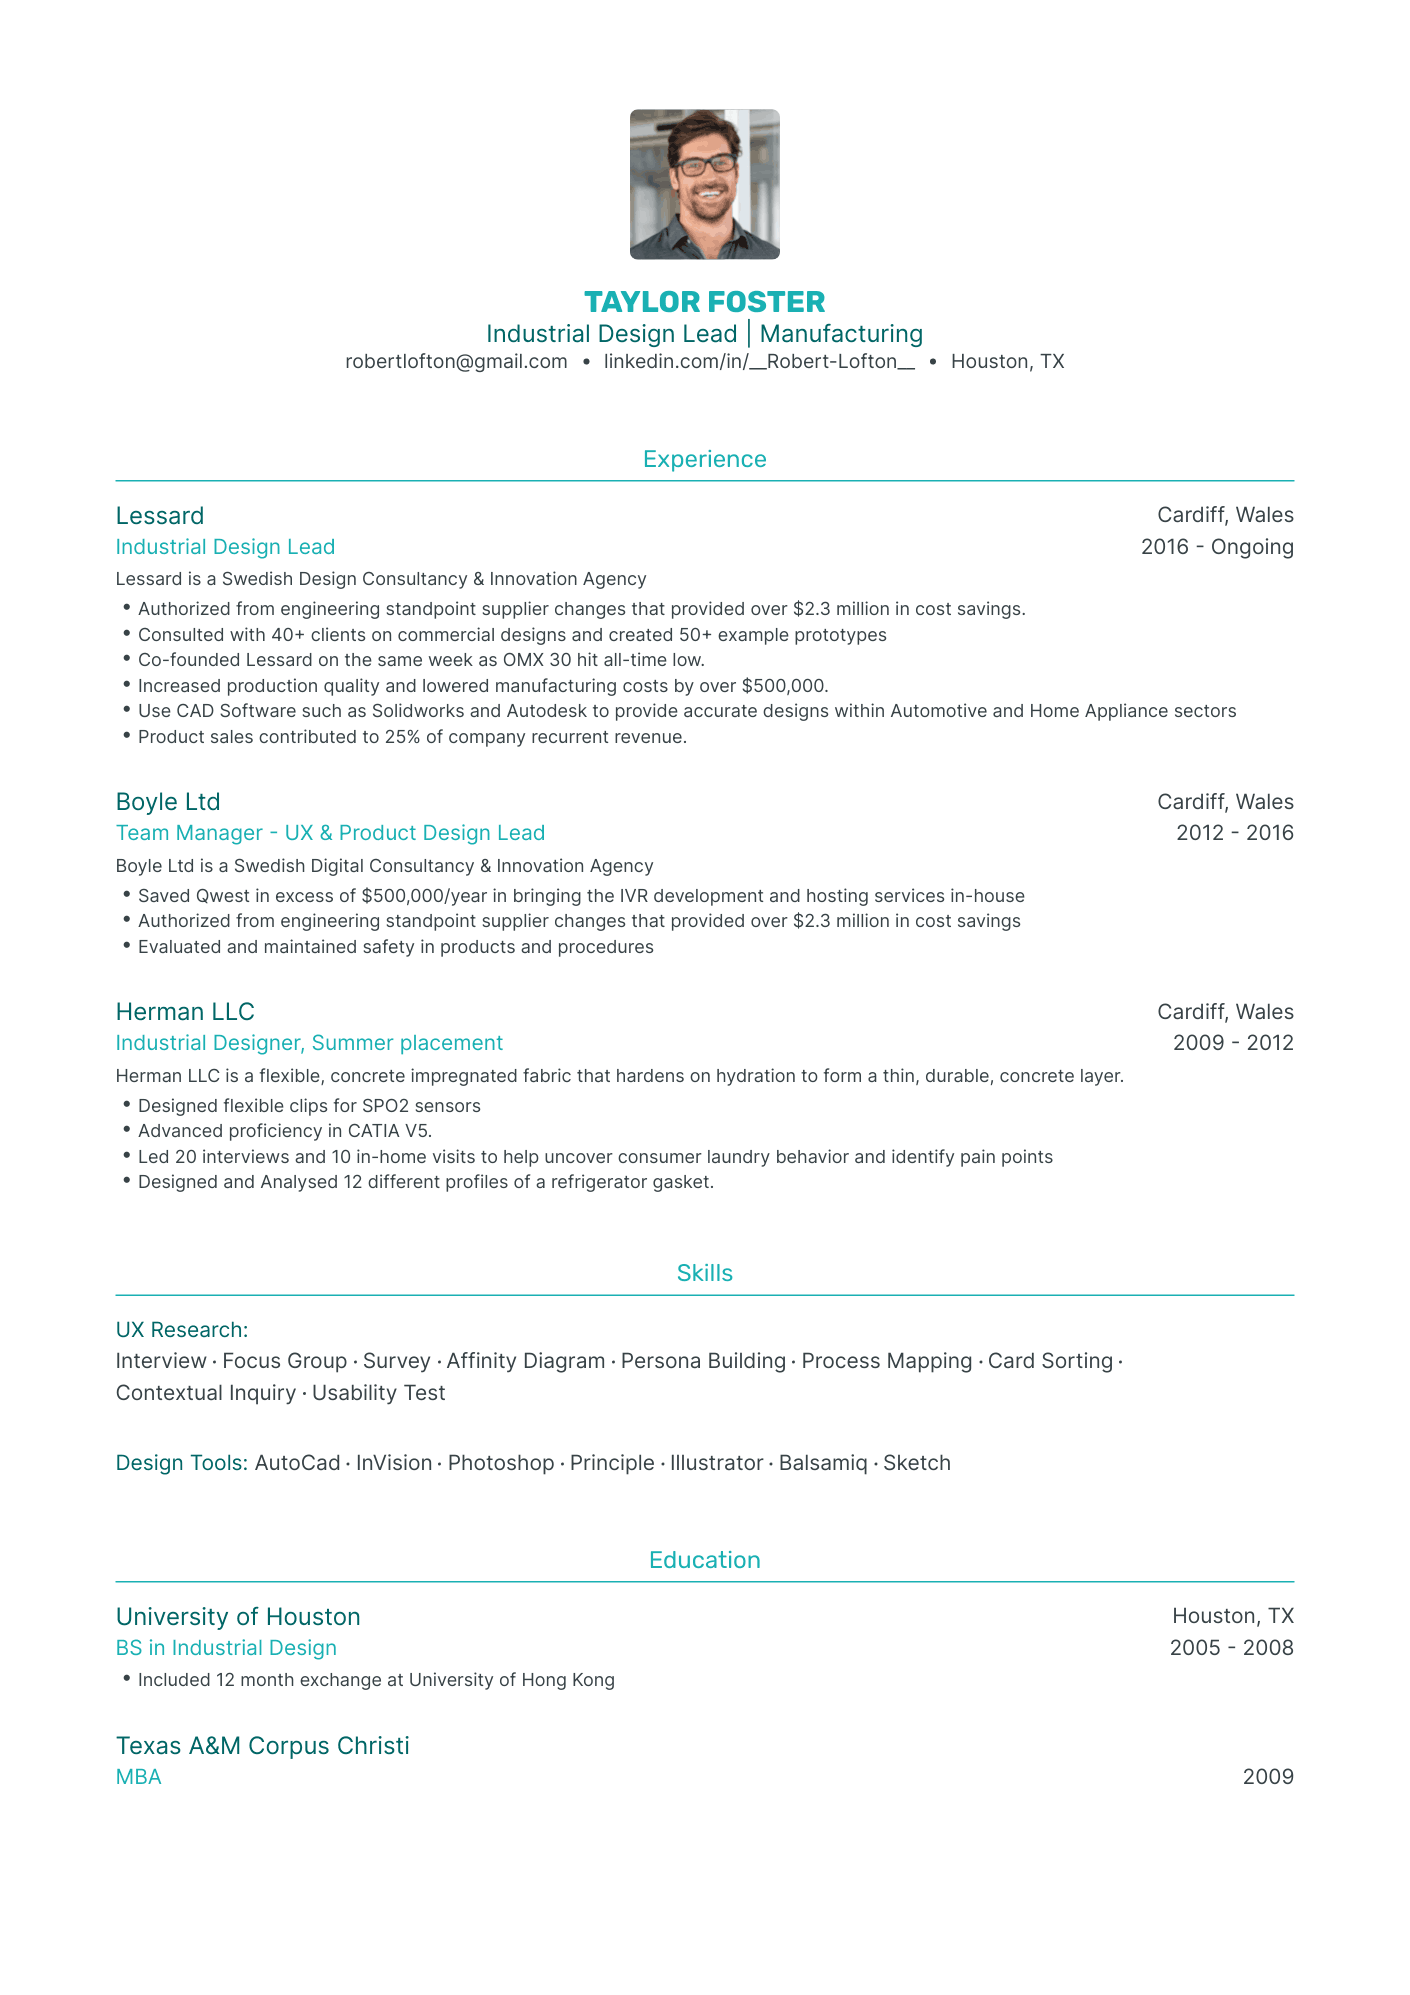 Traditional Industrial Design Resume Template